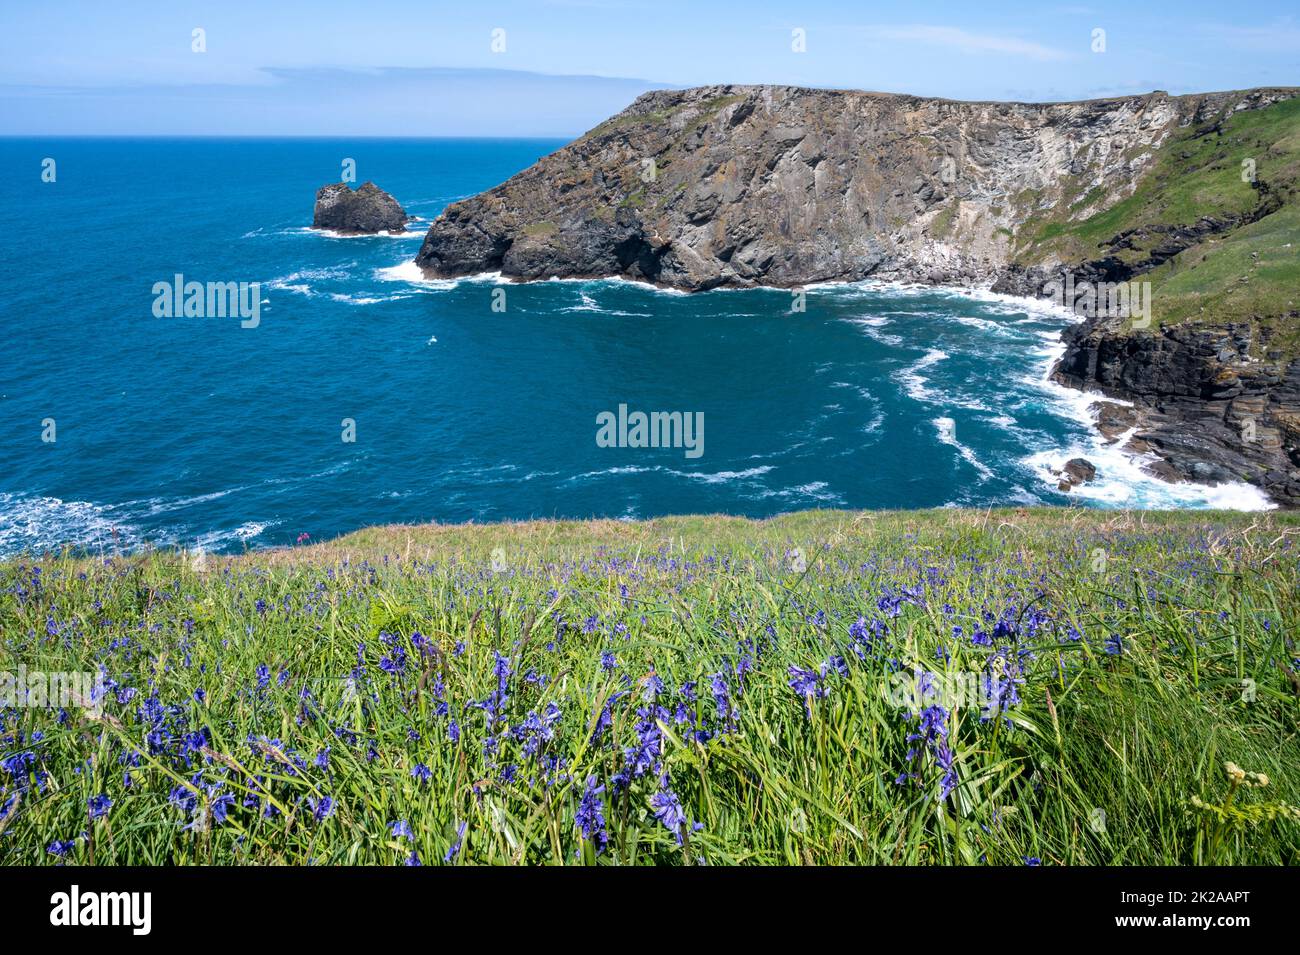 Swathes of English bluebells along the South West Coast Path from Tintagel to Willapark/ Bossiney., Cornwall UK. Stock Photo